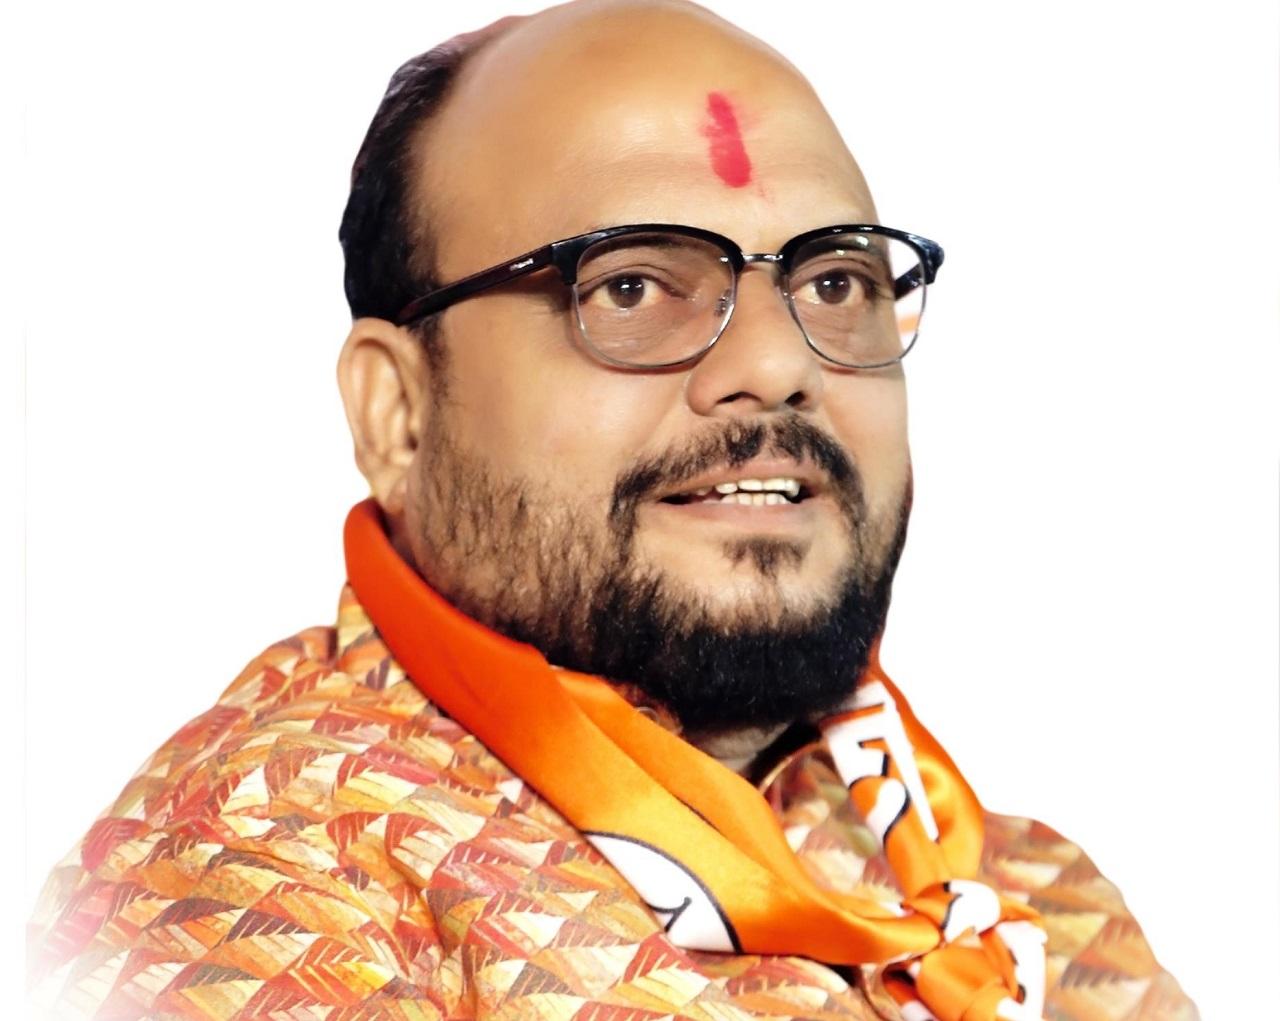 The Sena’s most sought after campaigner shifted to Shinde after he failed to convince Thackeray. Comes from Jalgaon Rural Assembly constituency. He was a minister of state in the Fadnavis government and later promoted by Thackeray in the MVA formation. He has contributed significantly to Sena’s growth in Khandesh. Pic/Facebook